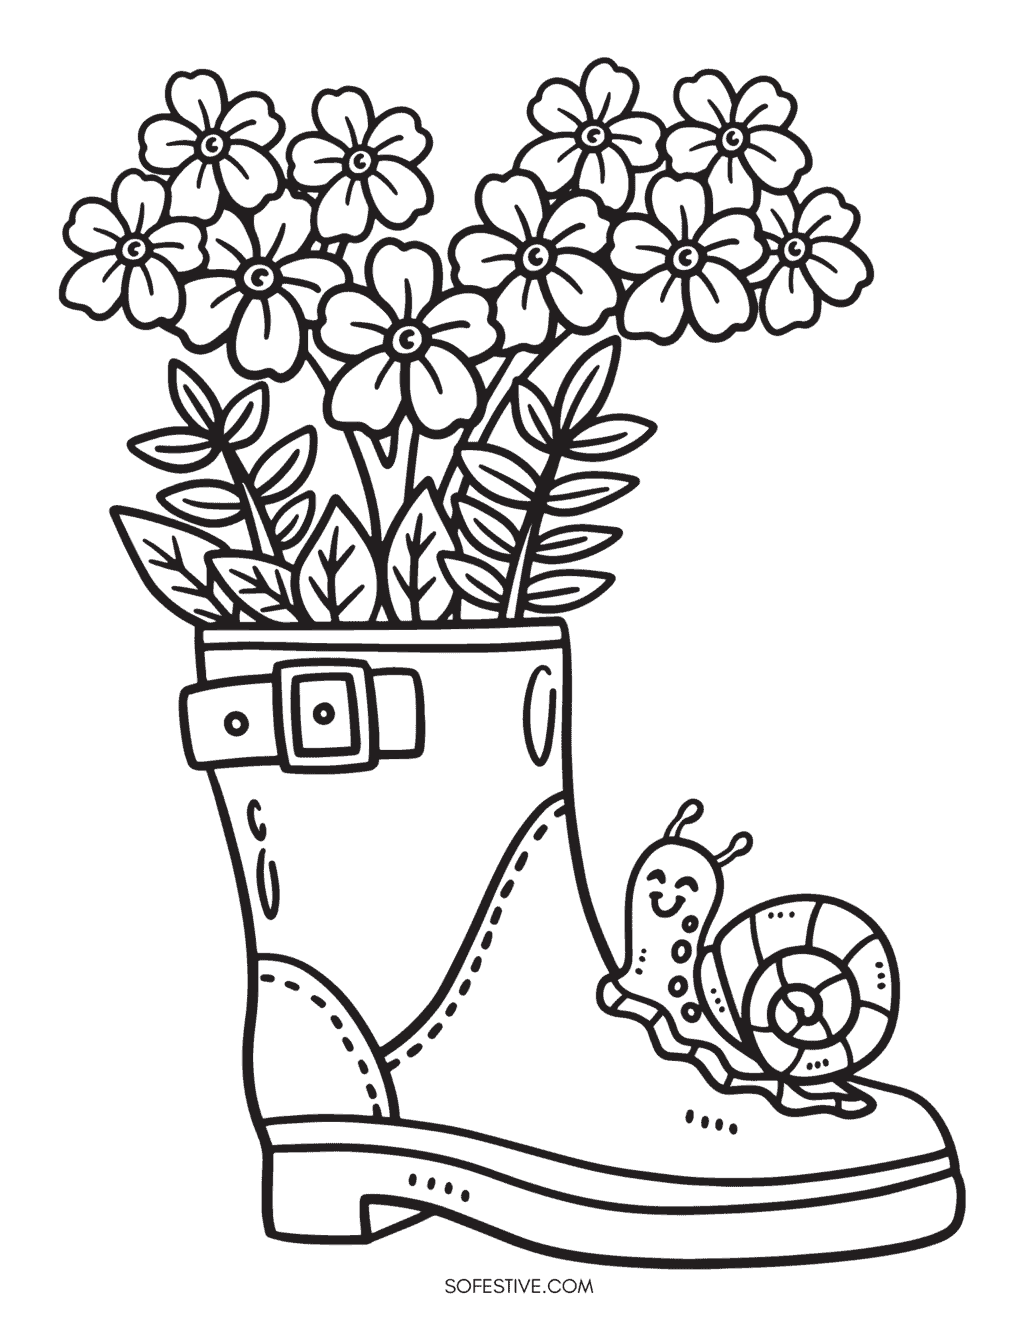 Free spring coloring pages updated spring coloring pages flower coloring pages spring coloring sheets